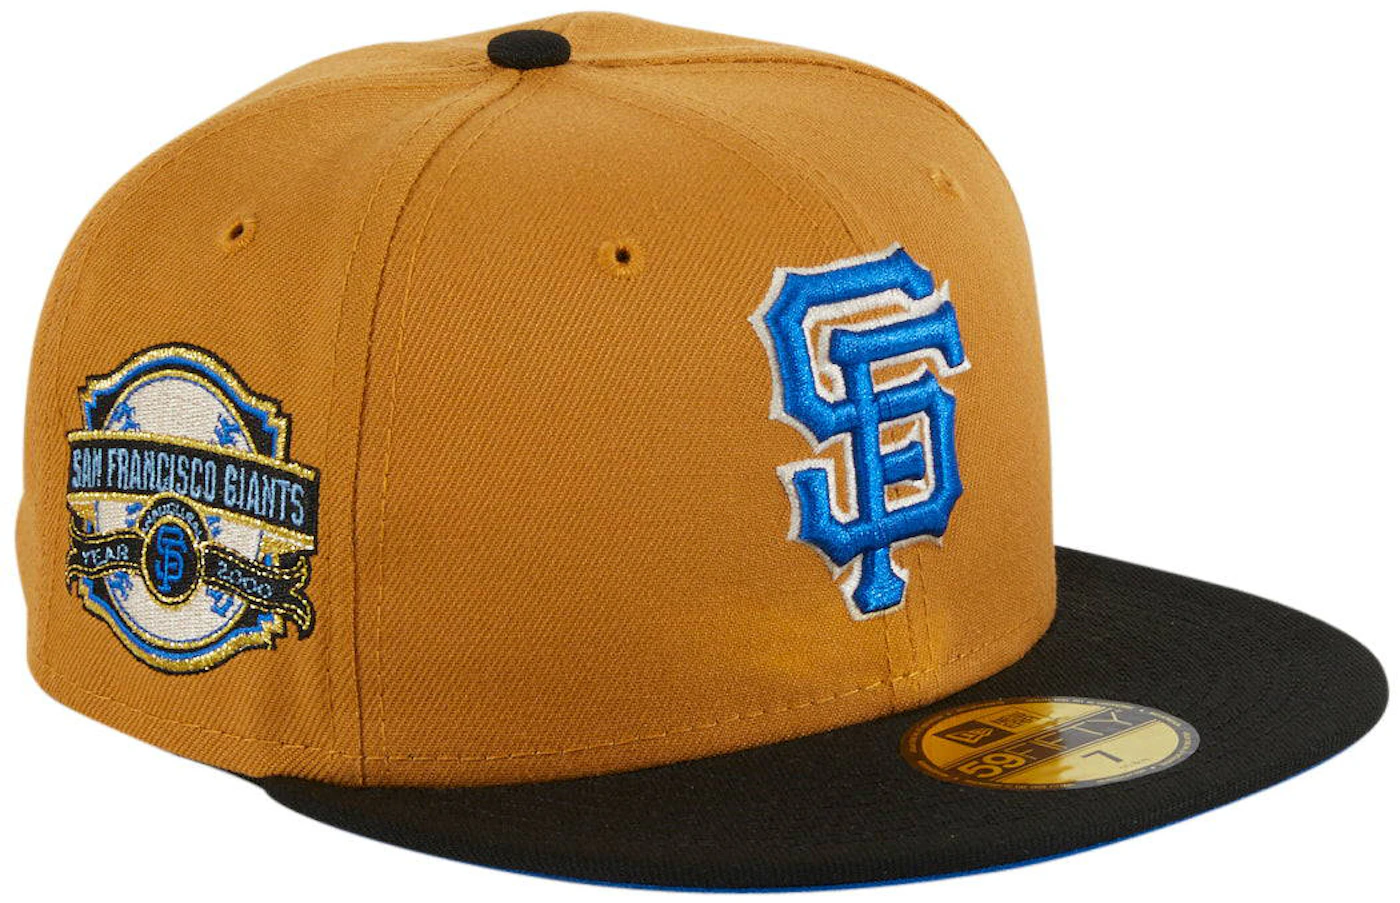 New Era San Francisco Giants Ancient Egypt 2000 Inaugural Hat Club Exclusive 59FIFTY Fitted Hat Khaki/Black/Royal Blue